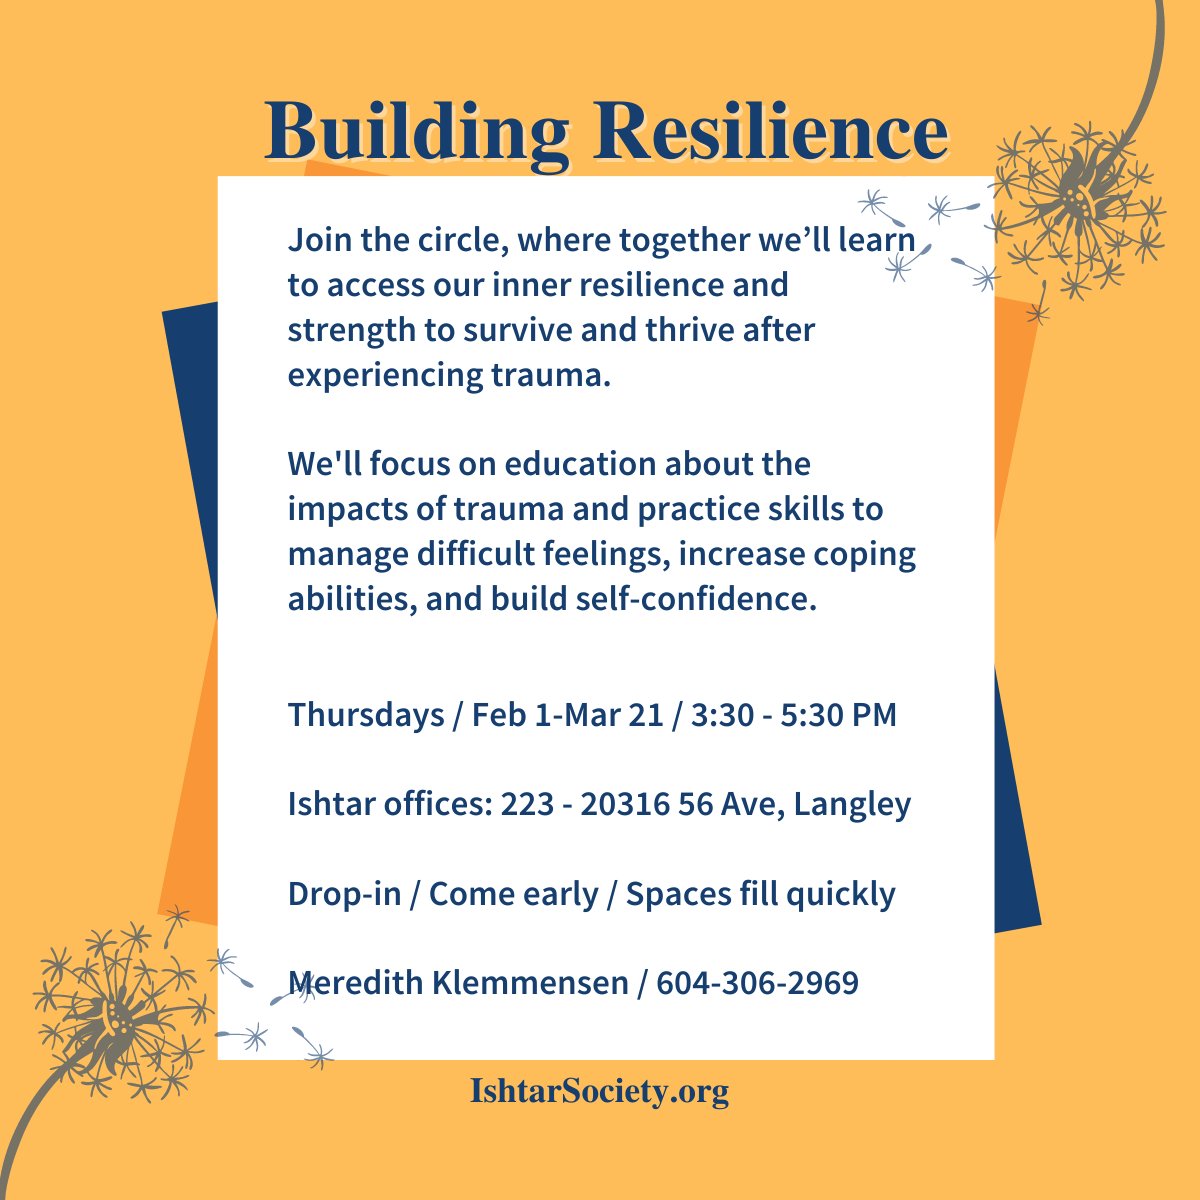 #BuildingResilience:
Next session TOMORROW! 
Thurs, Feb 22 // 3:30-5:30PM
#JoinTheCircle
Learn about trauma + the skills you need to
🤩manage difficult feelings
🤩increase coping abilities
🤩build self-confidence
IshtarSociety.org

#EndAbuse #LangleyBC #TheLangleys